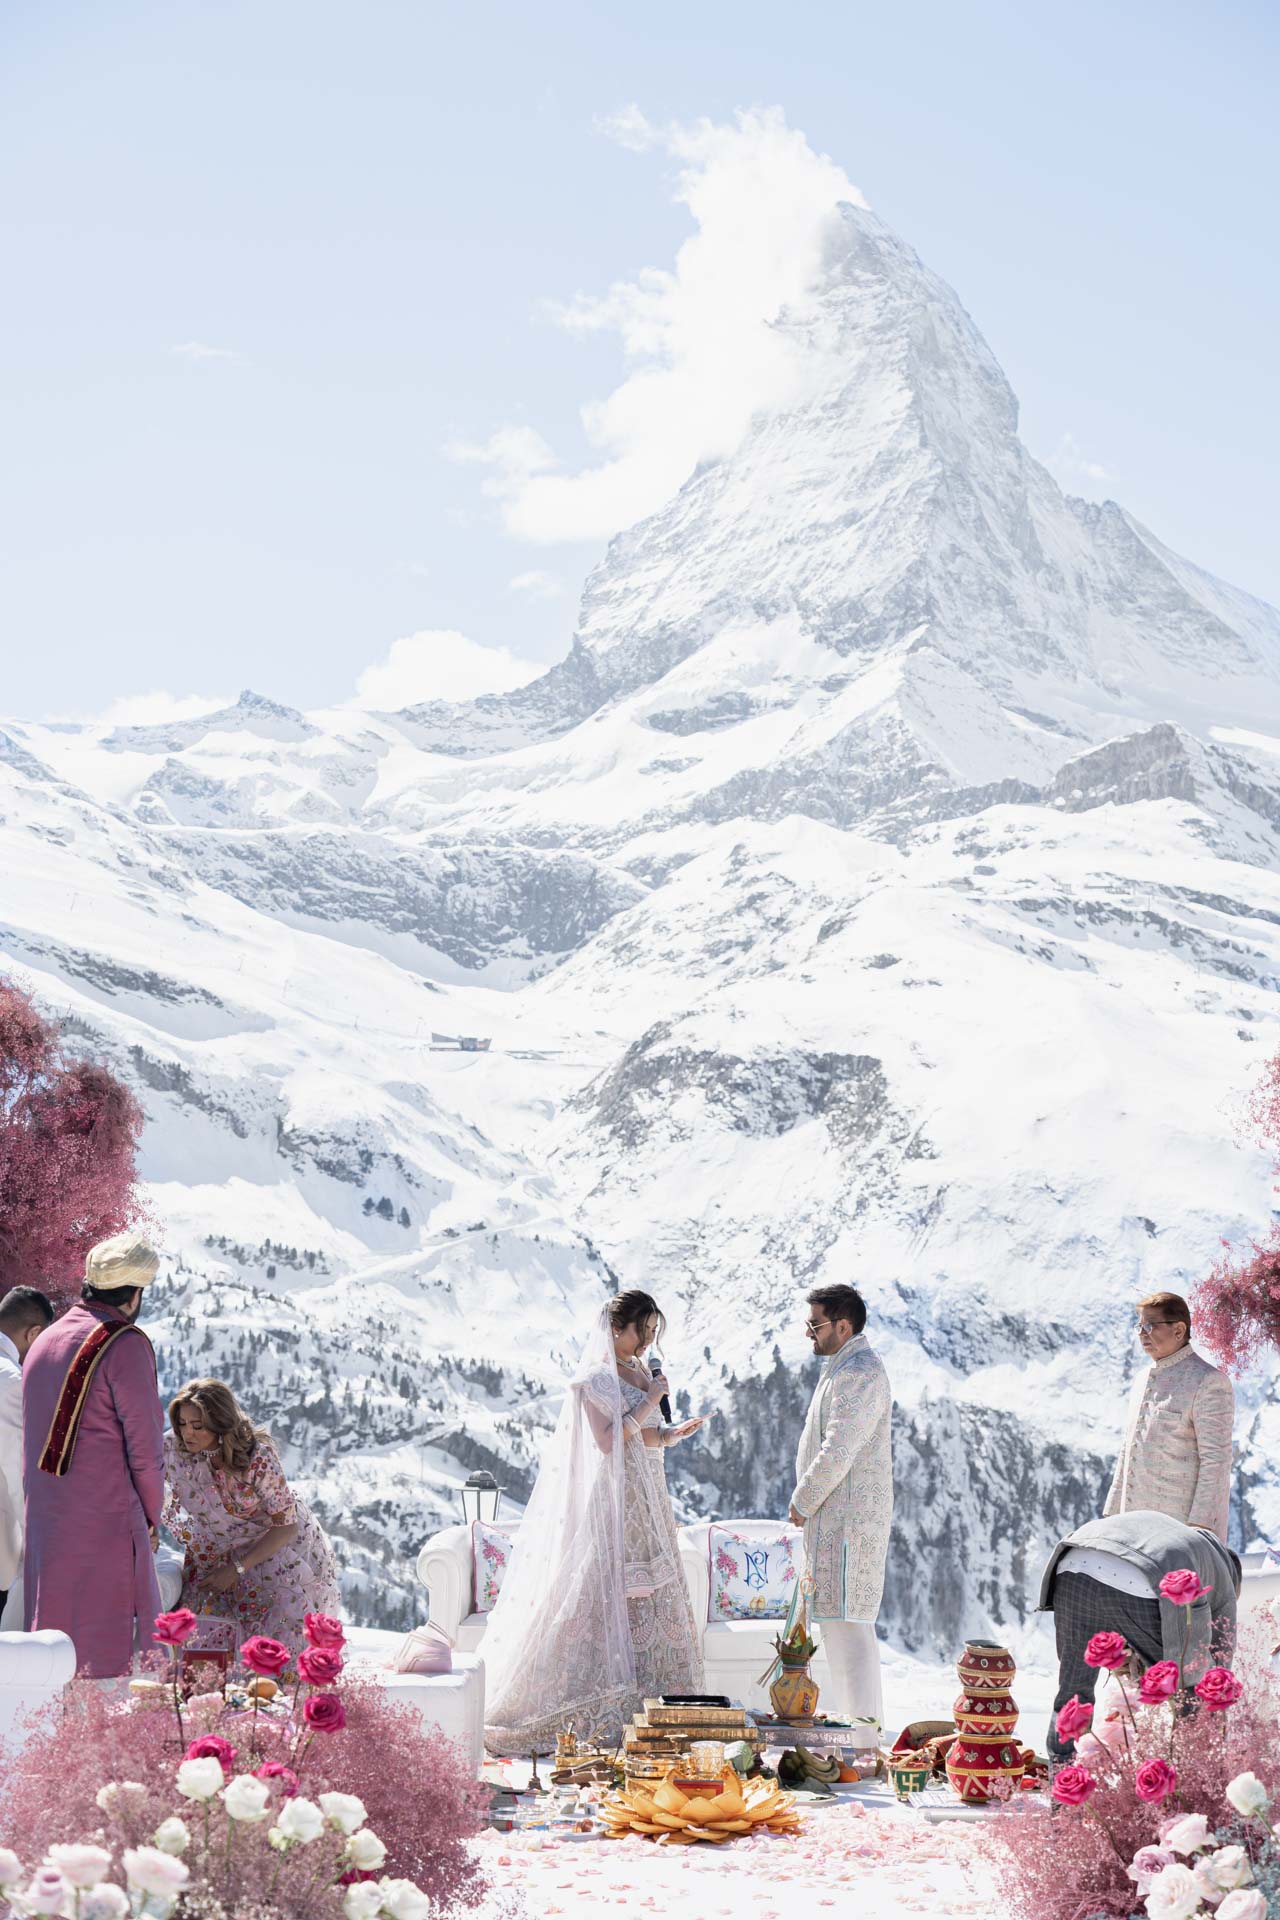 A wedding on the slopes of Matterhorn mountain, between the white of snow and the colors of India :: 35